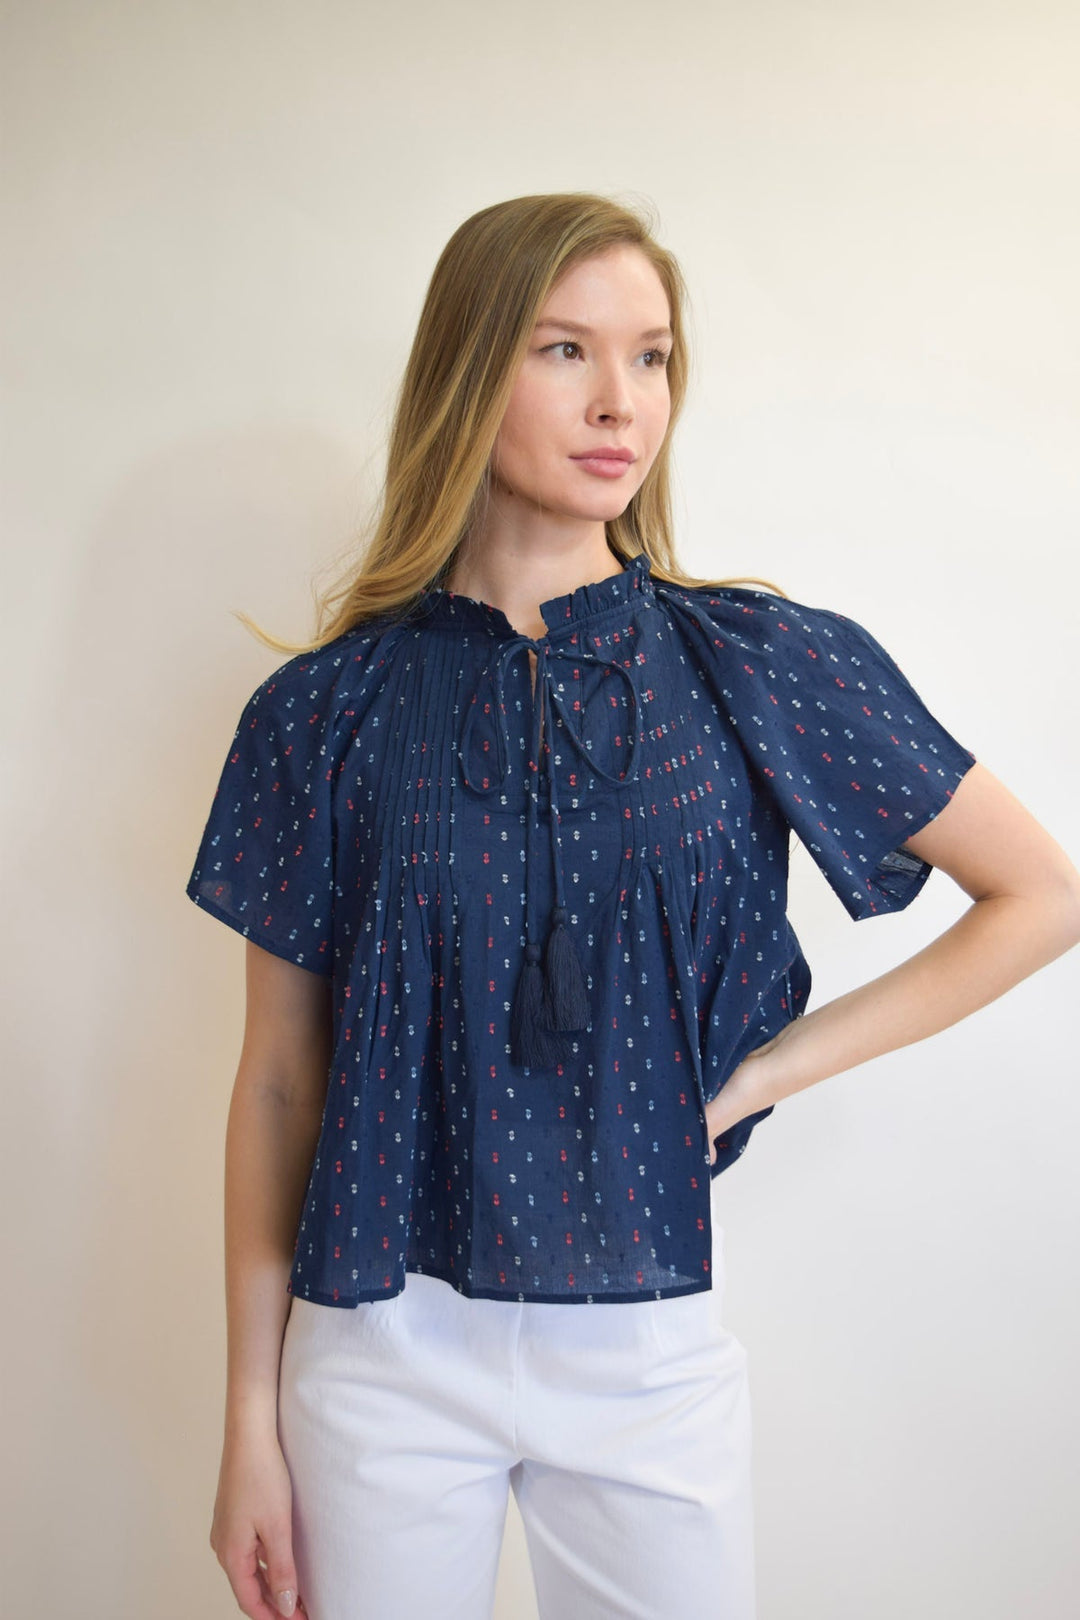 Never A Wallflower - Peasant S/S Swiss Dot Top: Navy - Shorely Chic Boutique